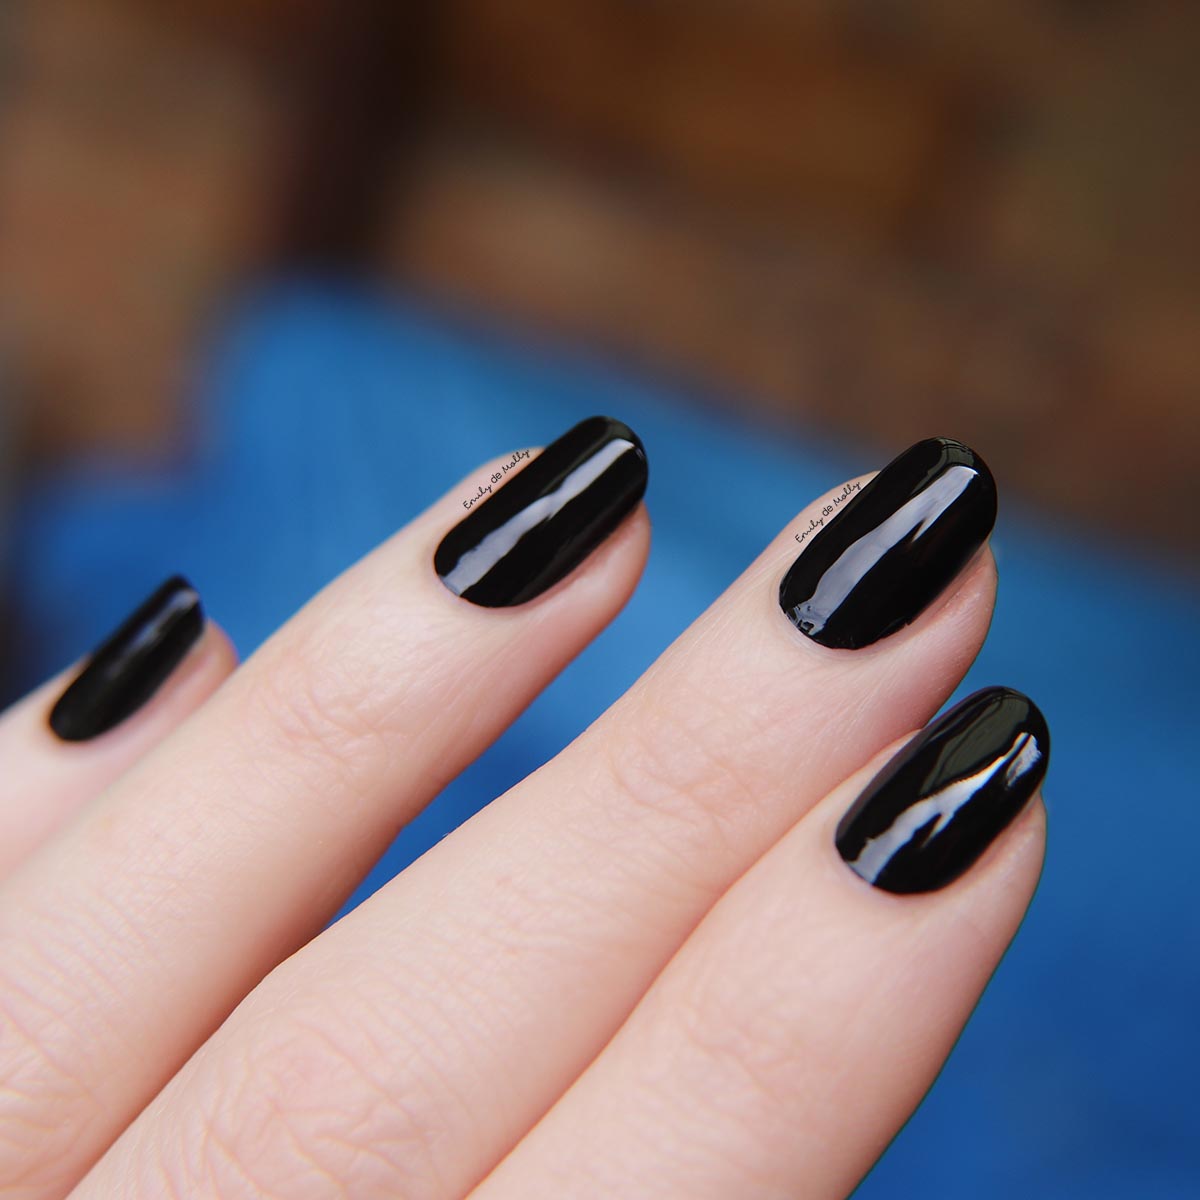 After Midnight Reflective Nail Polish By KBShimmer-cacanhphuclong.com.vn